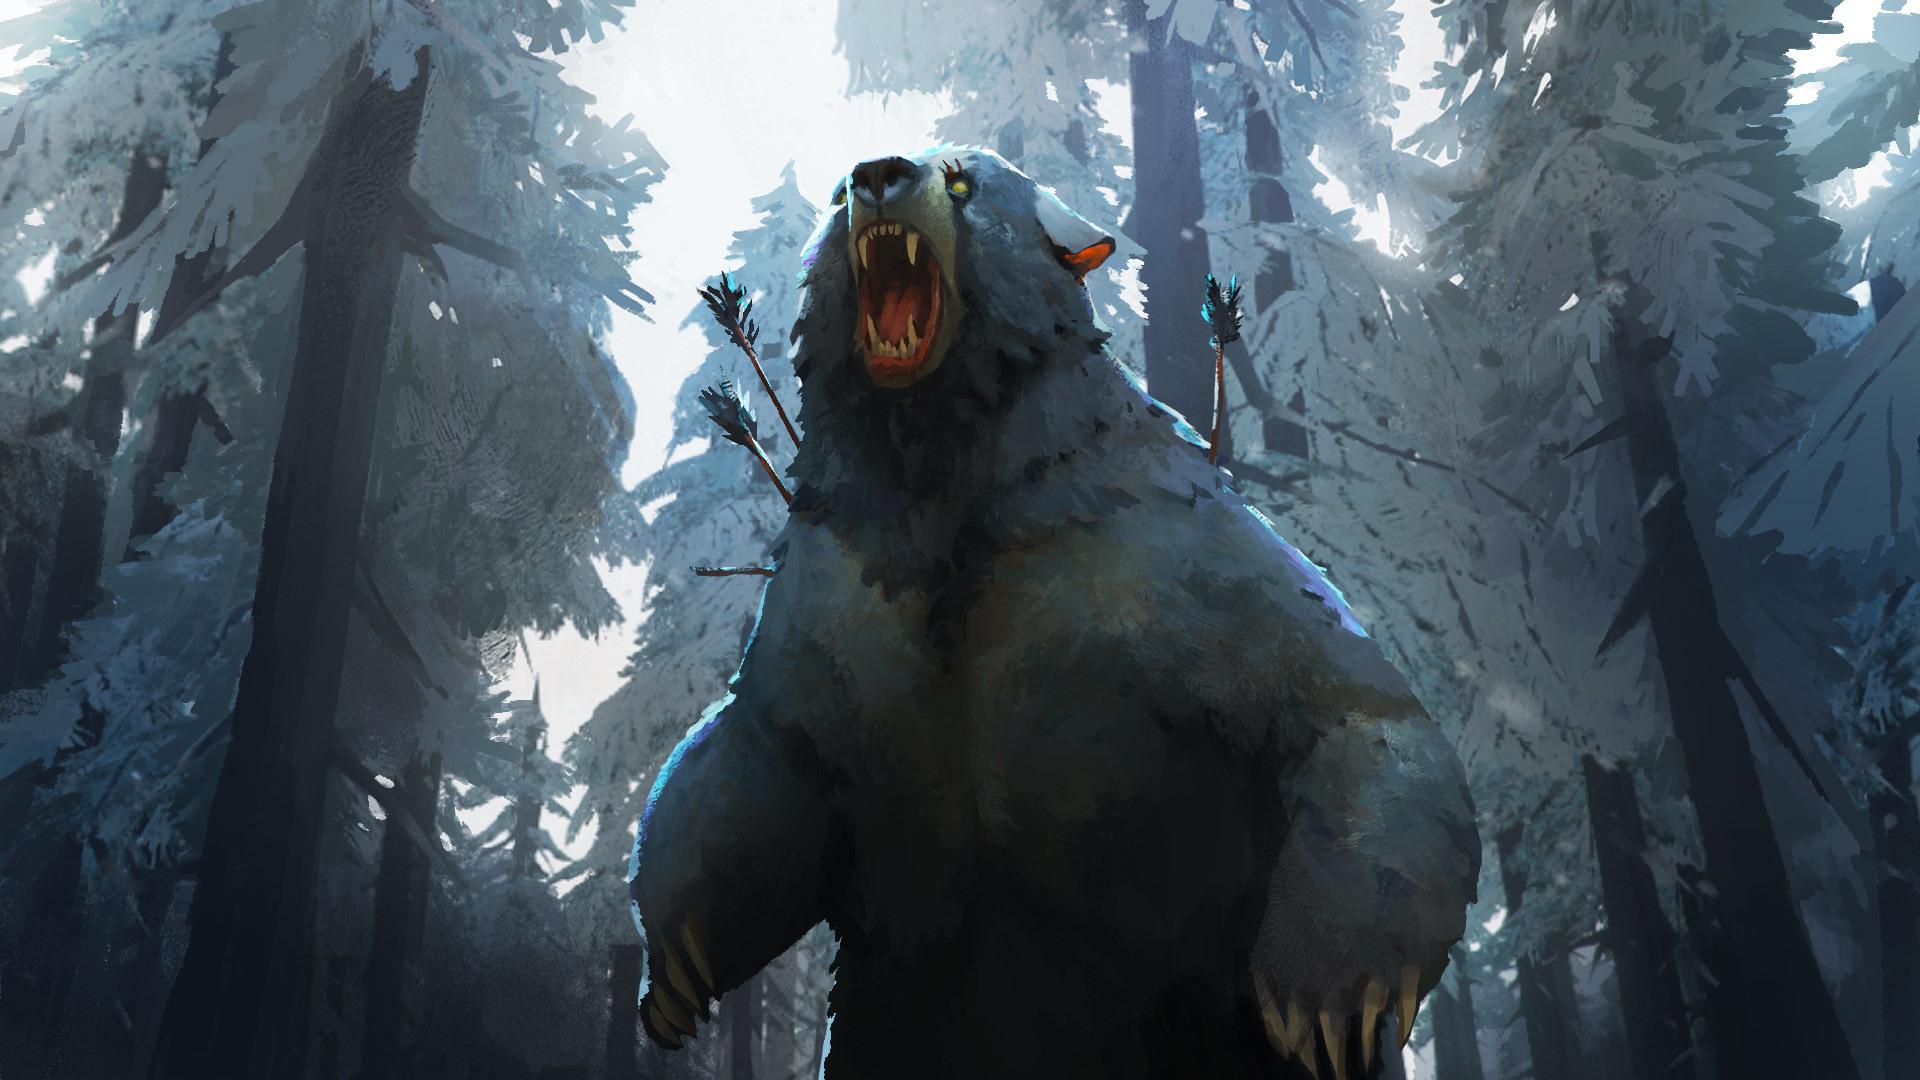 Wounded bear. Wallpaper from The Long Dark